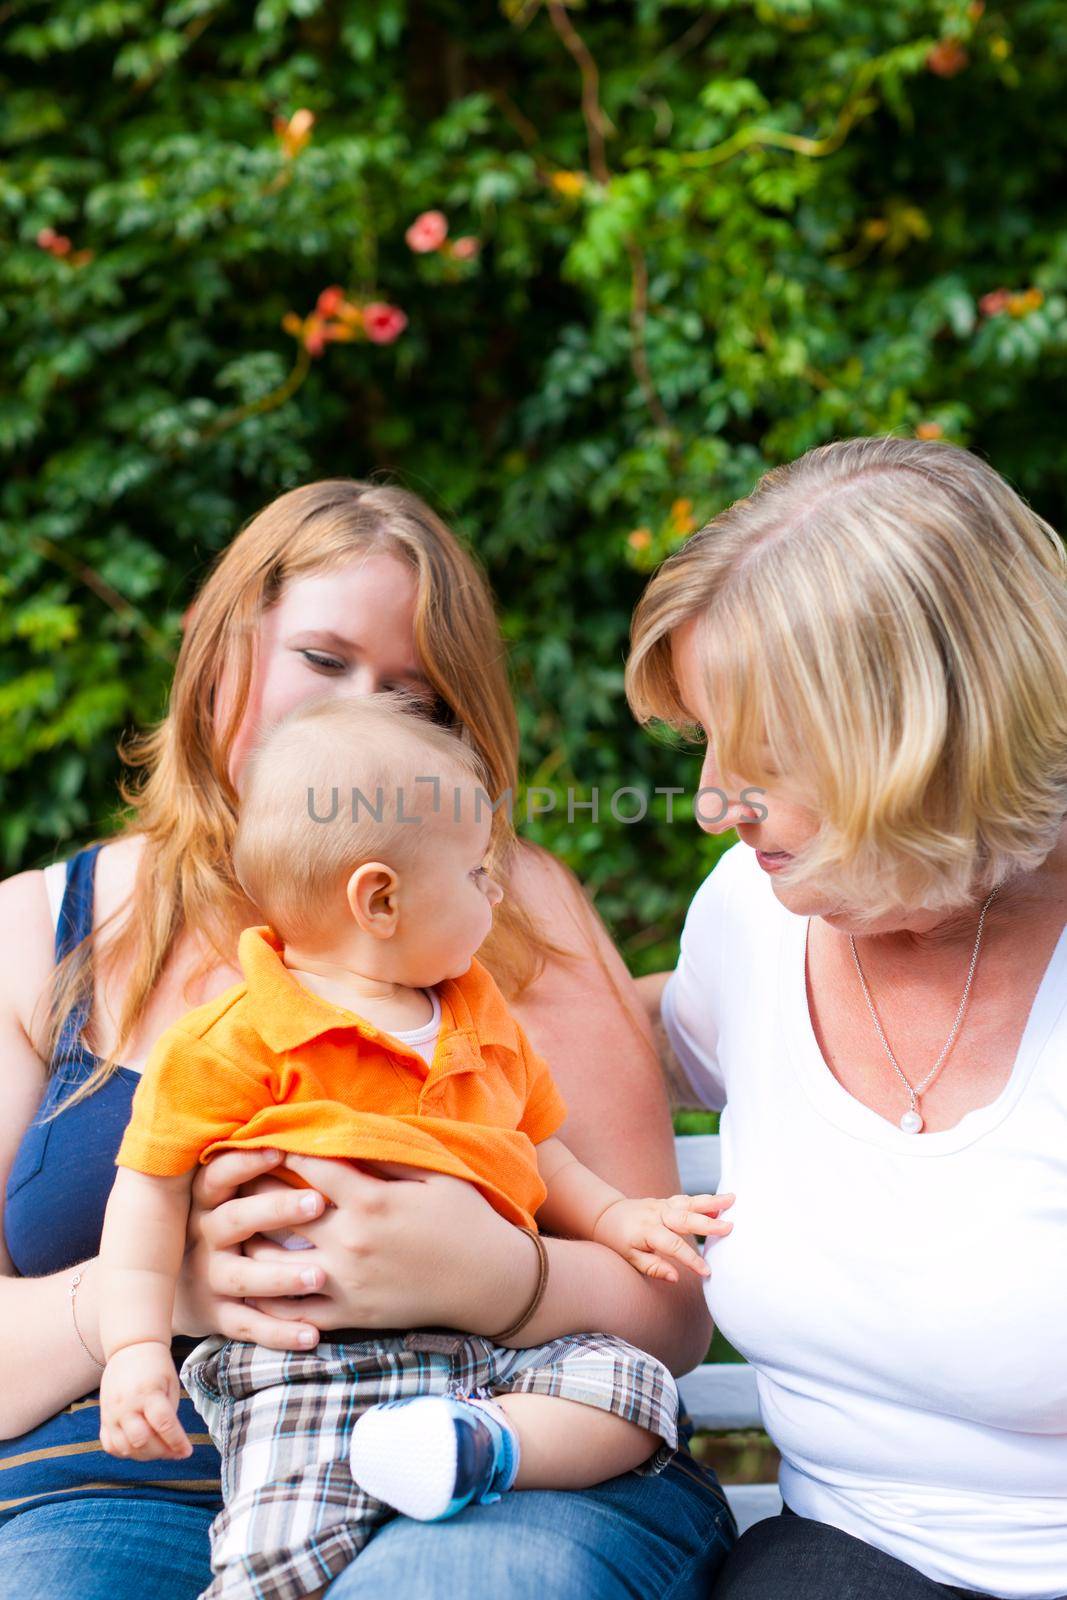 Family - Grandmother, mother and child sitting and playing in garden